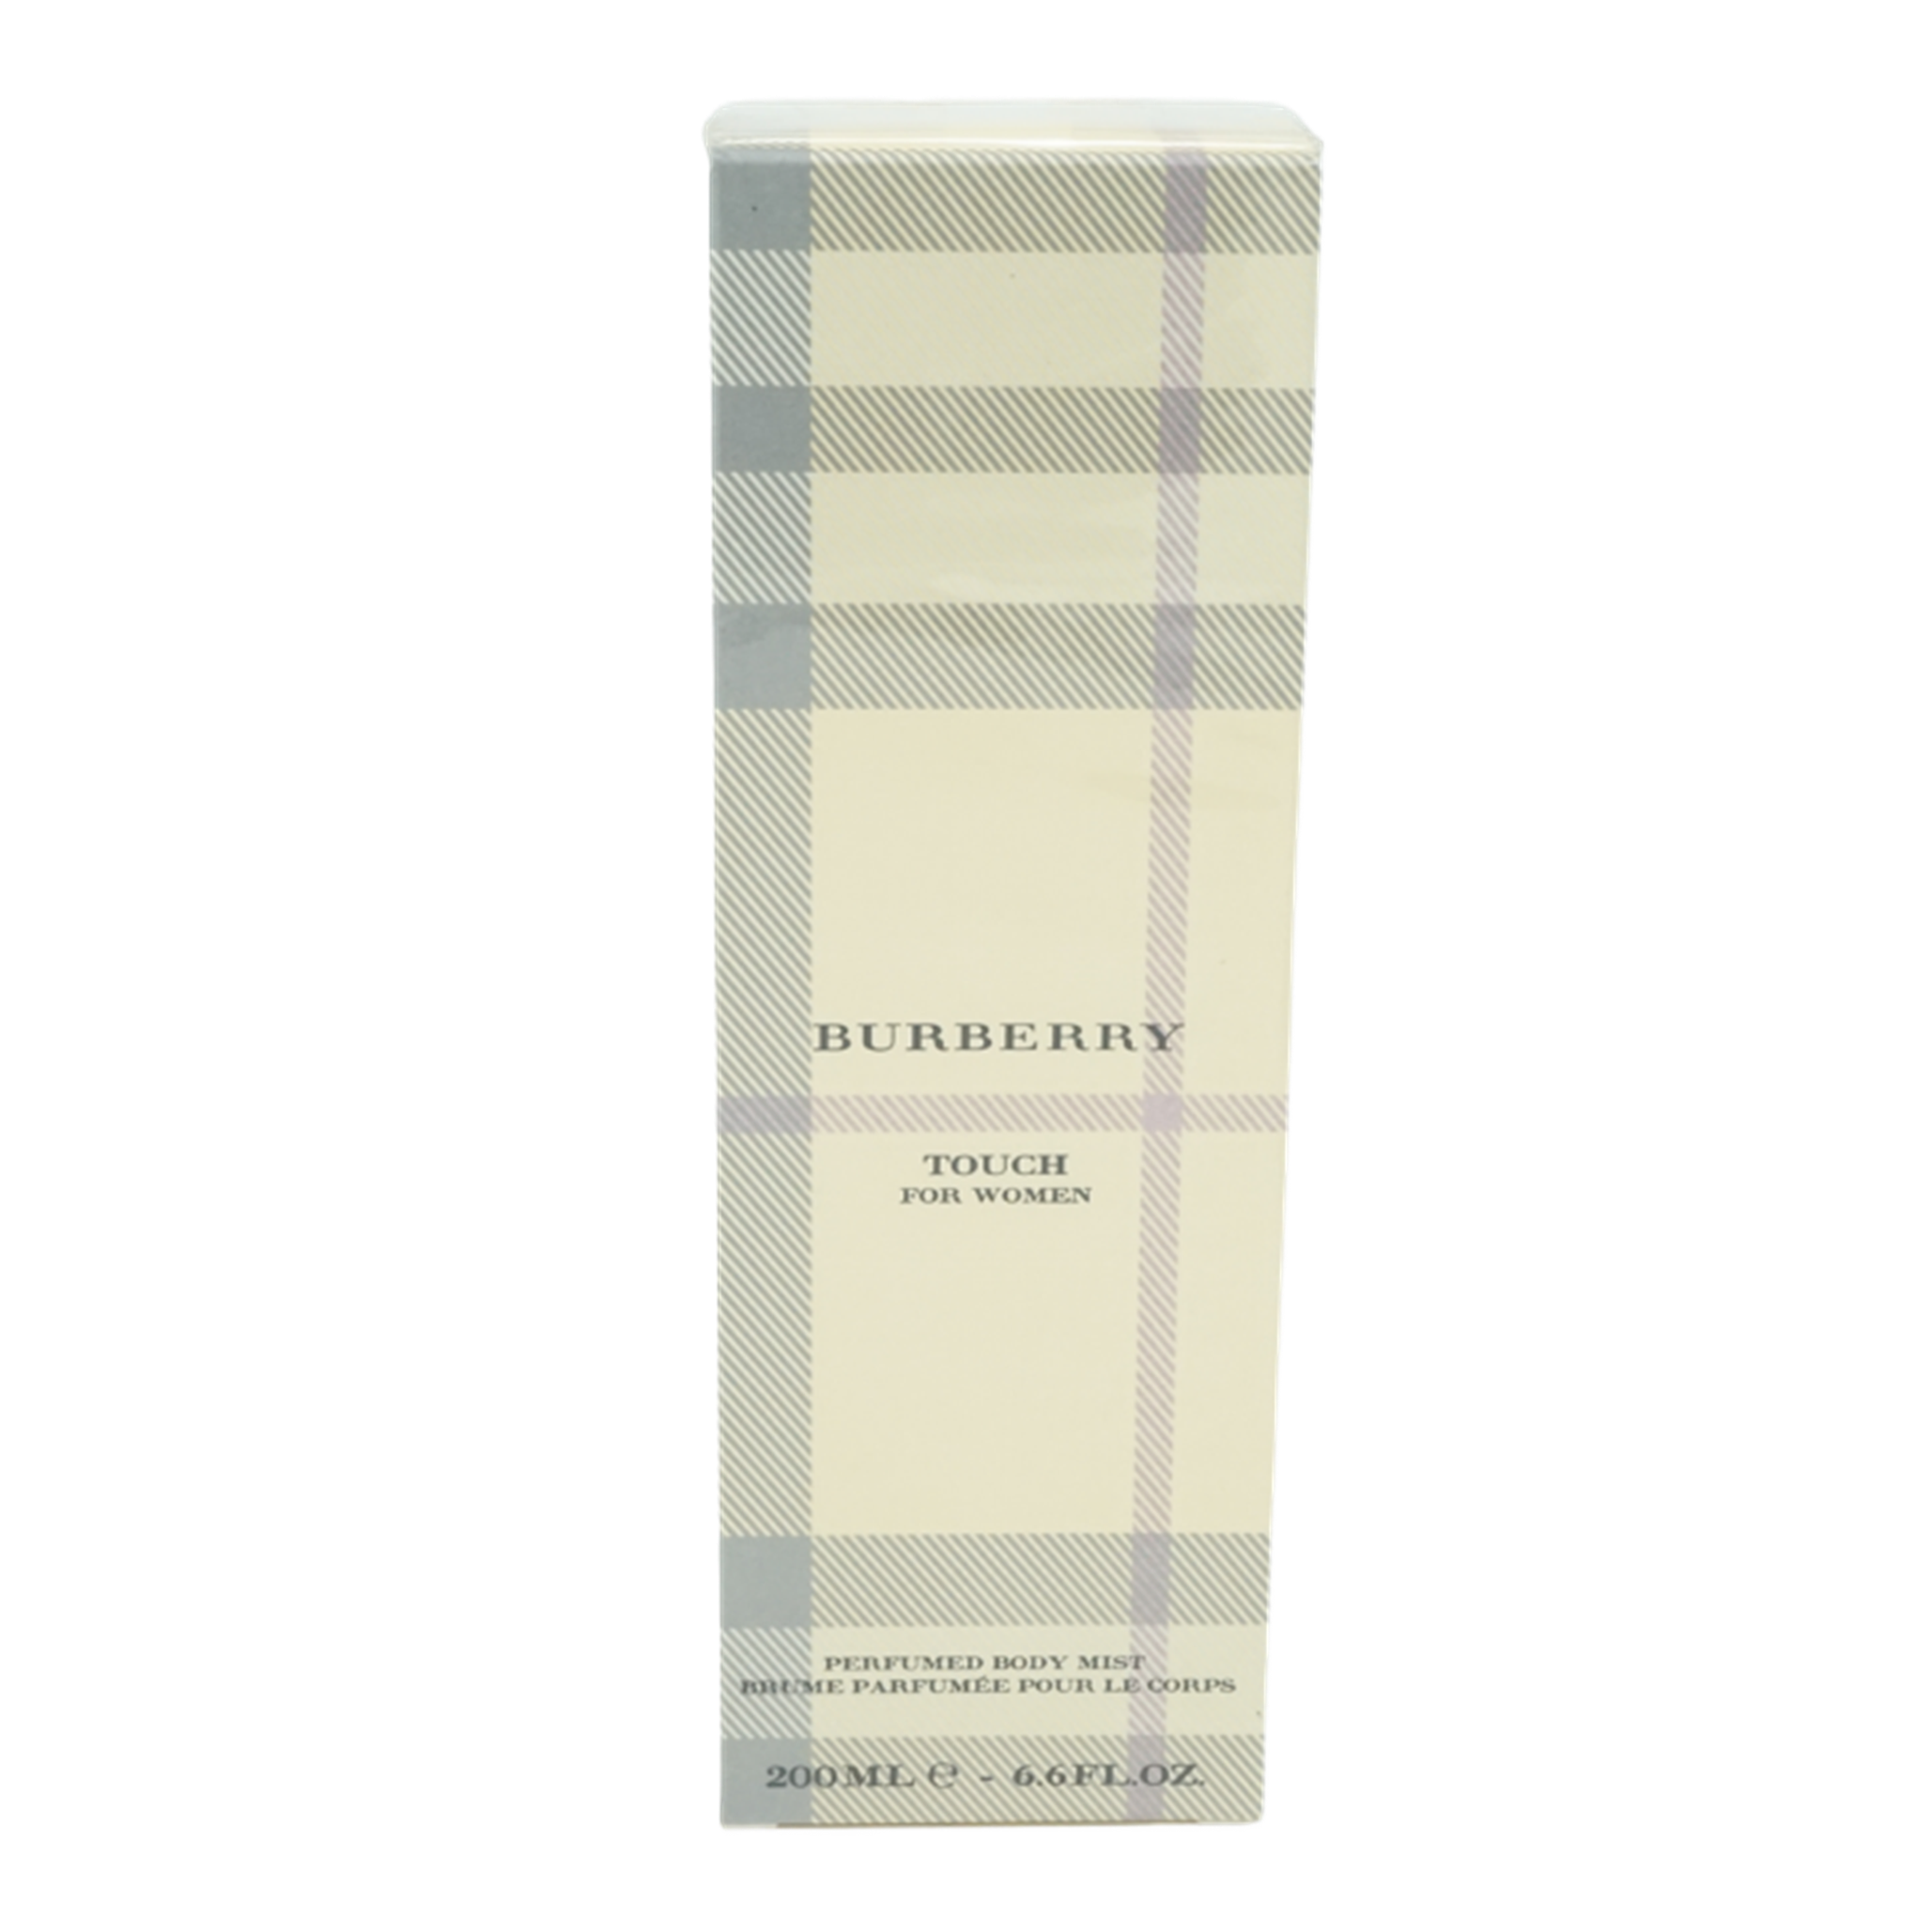 Burberry Touch For Women Perfumed Body Mist   200ml